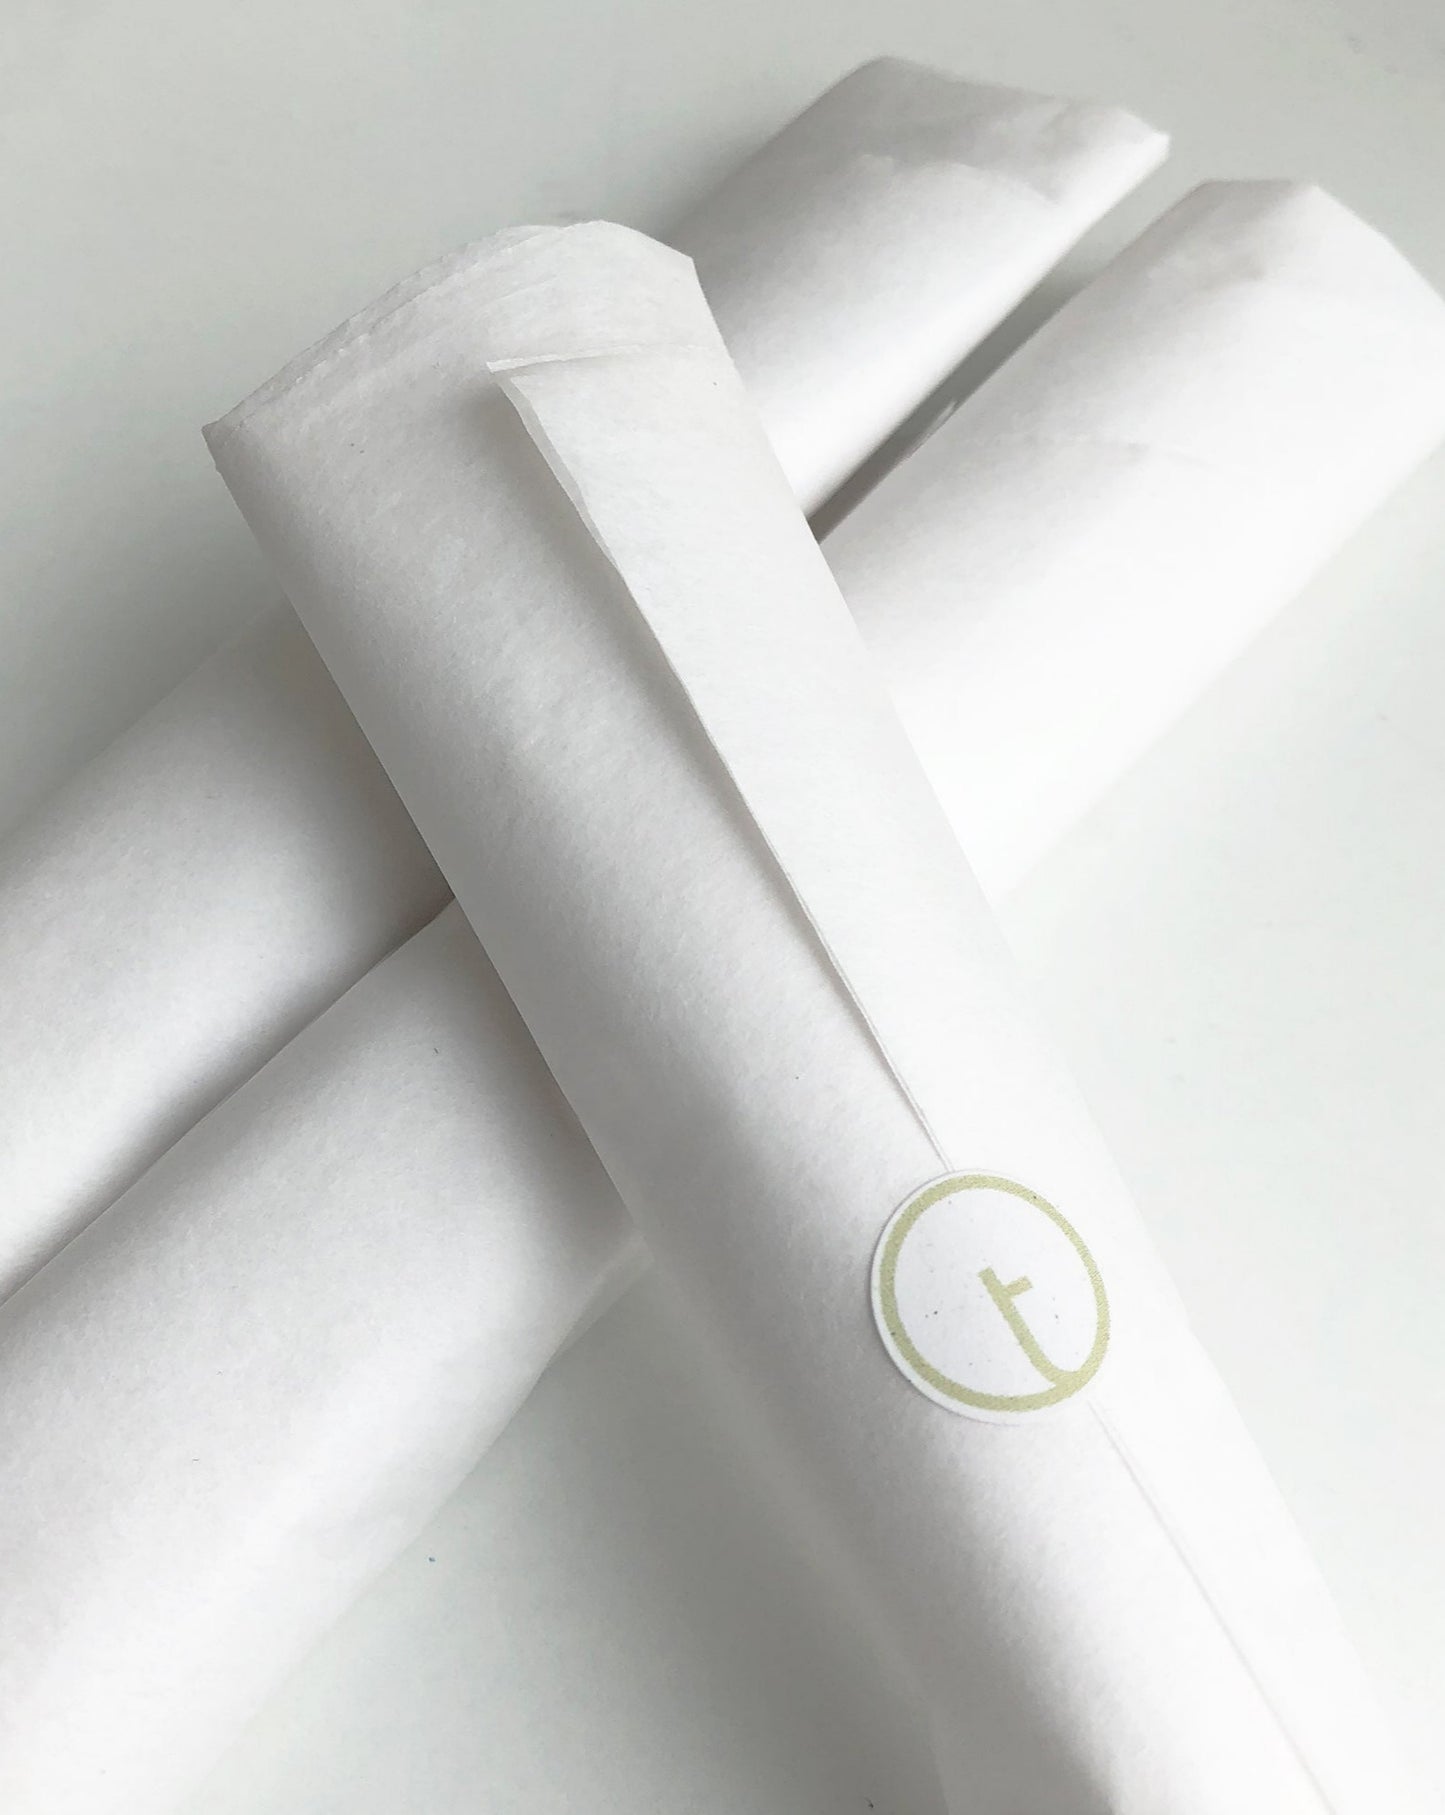 toolly's dust-off brush is wrapped in a tissue paper. Plastic-free packaging for every product.